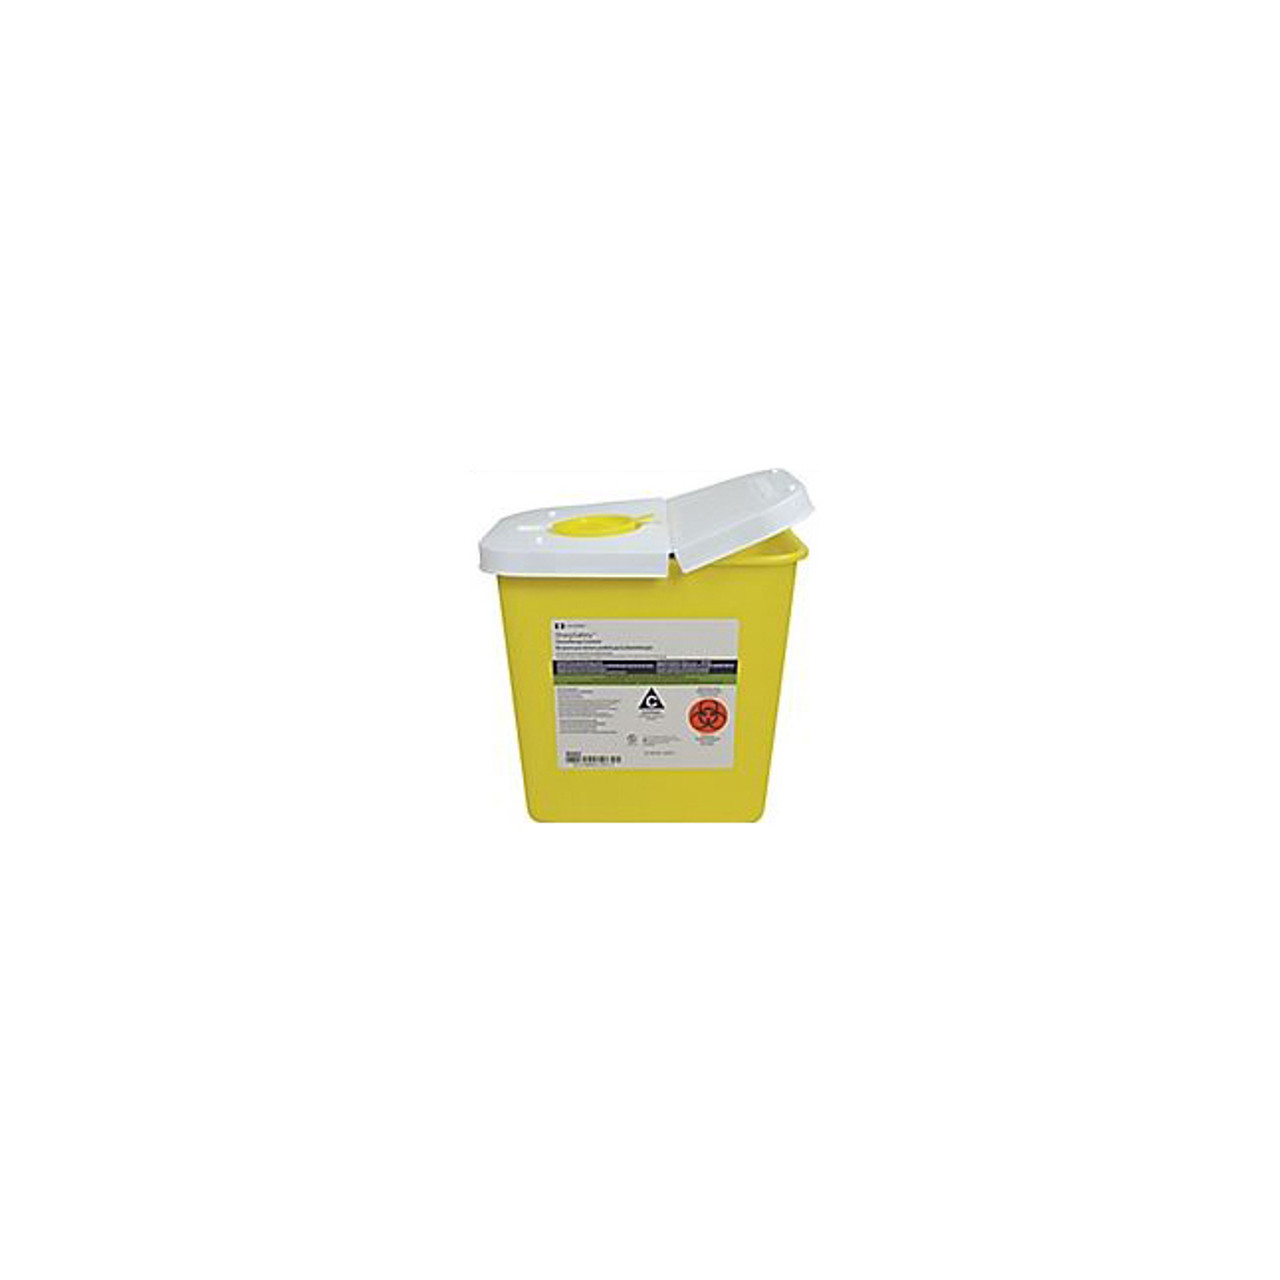 EA/1 SHARPS CONTAINER 3 GAL (11.35L) MULTI-PURPOSE W/ ROTOR OPENING LID YELLOW